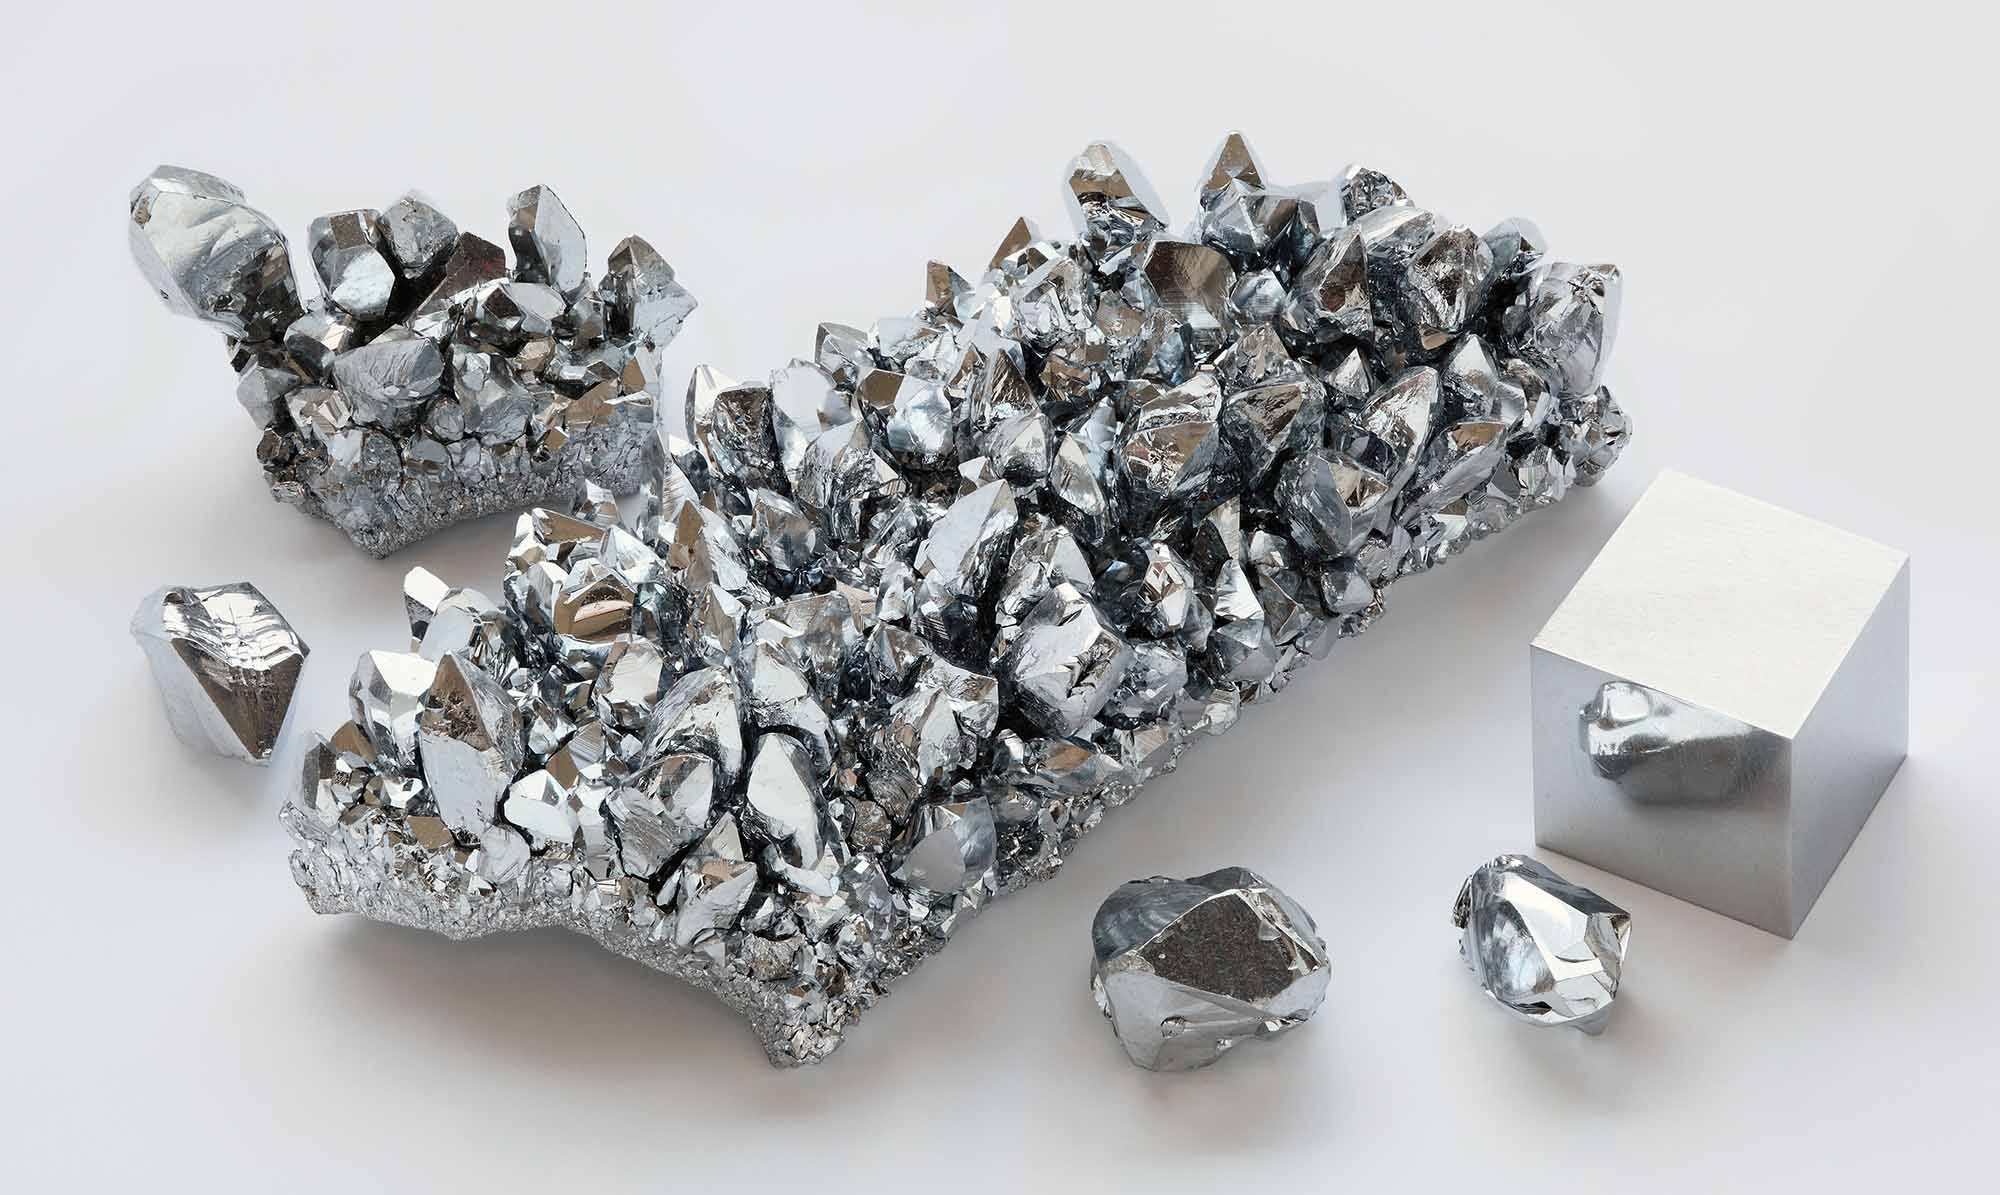 Various forms of chromium, including raw crystals and a polished cube, displayed on a white surface.